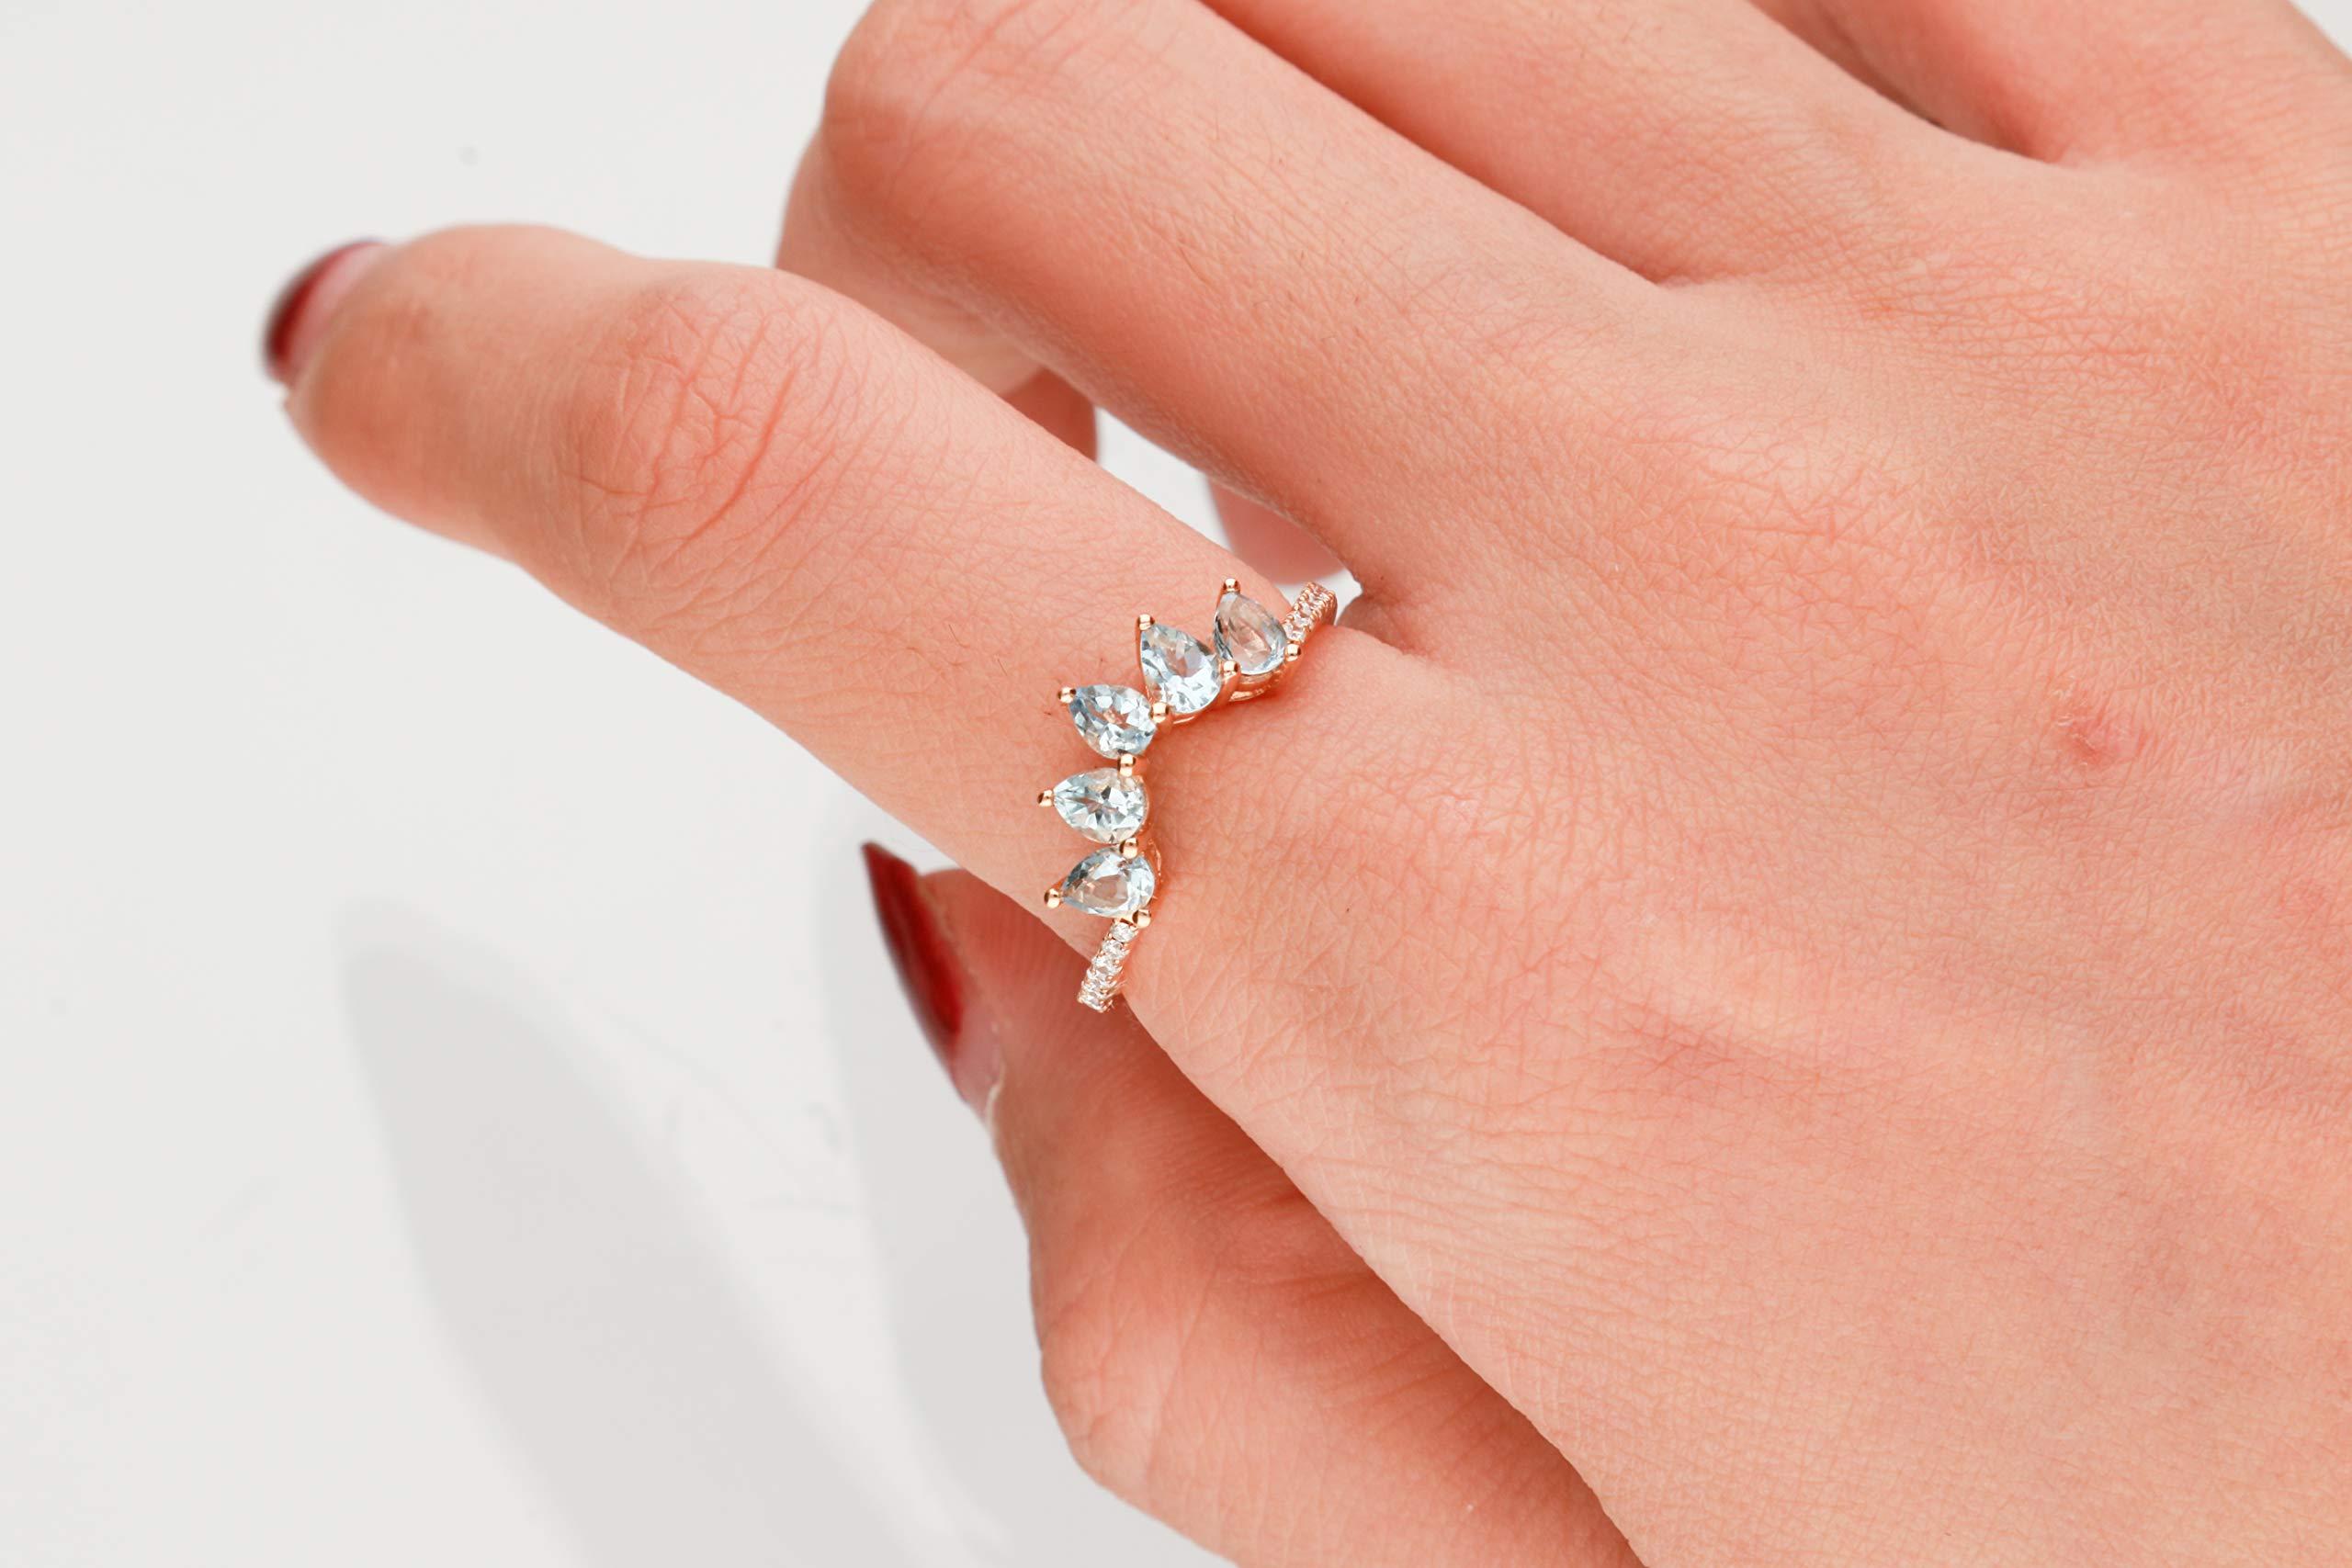 Decorate yourself in elegance with this Ring is crafted from 18-karat Rose Gold by Gin & Grace. This Ring is made up of Pear-Cut Aquamarine (5 pcs) 0.76 carat and Round-cut White Diamond (12 Pcs) 0.09 Carat. This Ring is weight 2.44 grams. This